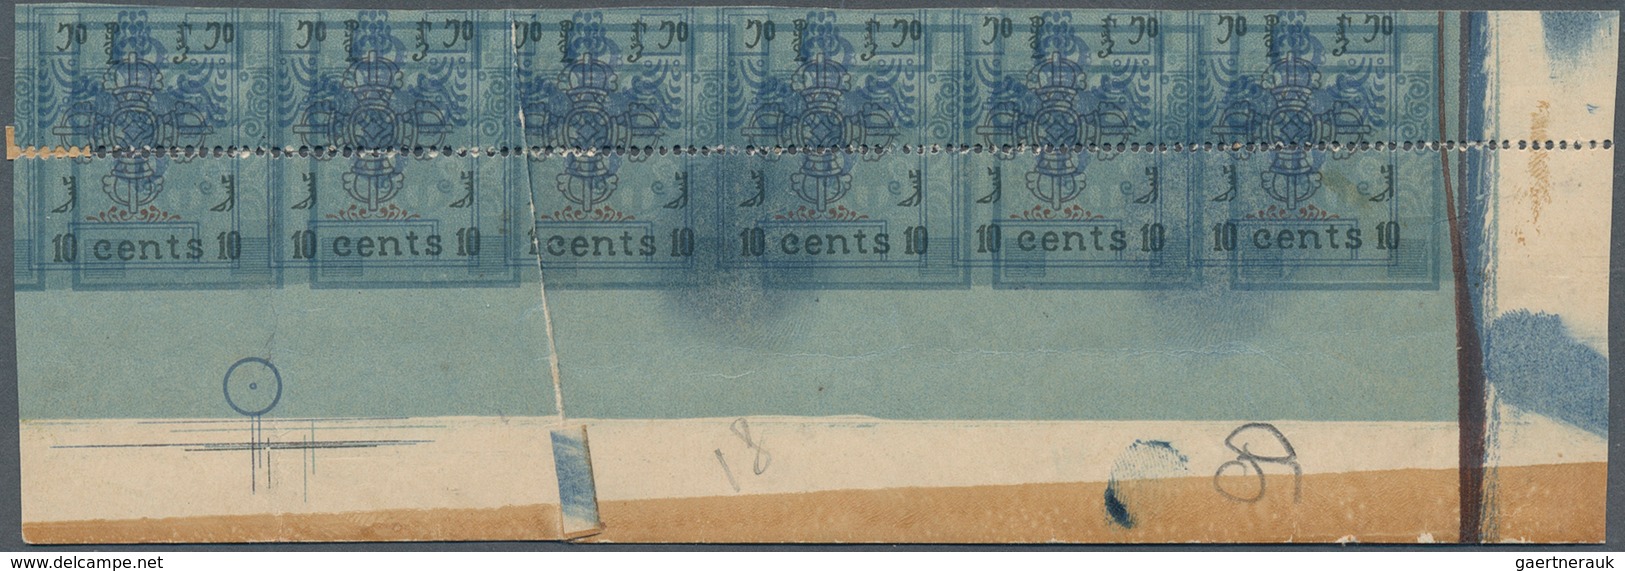 Mongolei: 1924 First Issue 10c. IMPERFORATED PROOF, Bottom Right Corner Strip Of 6, Variety "SHIFTED - Mongolie